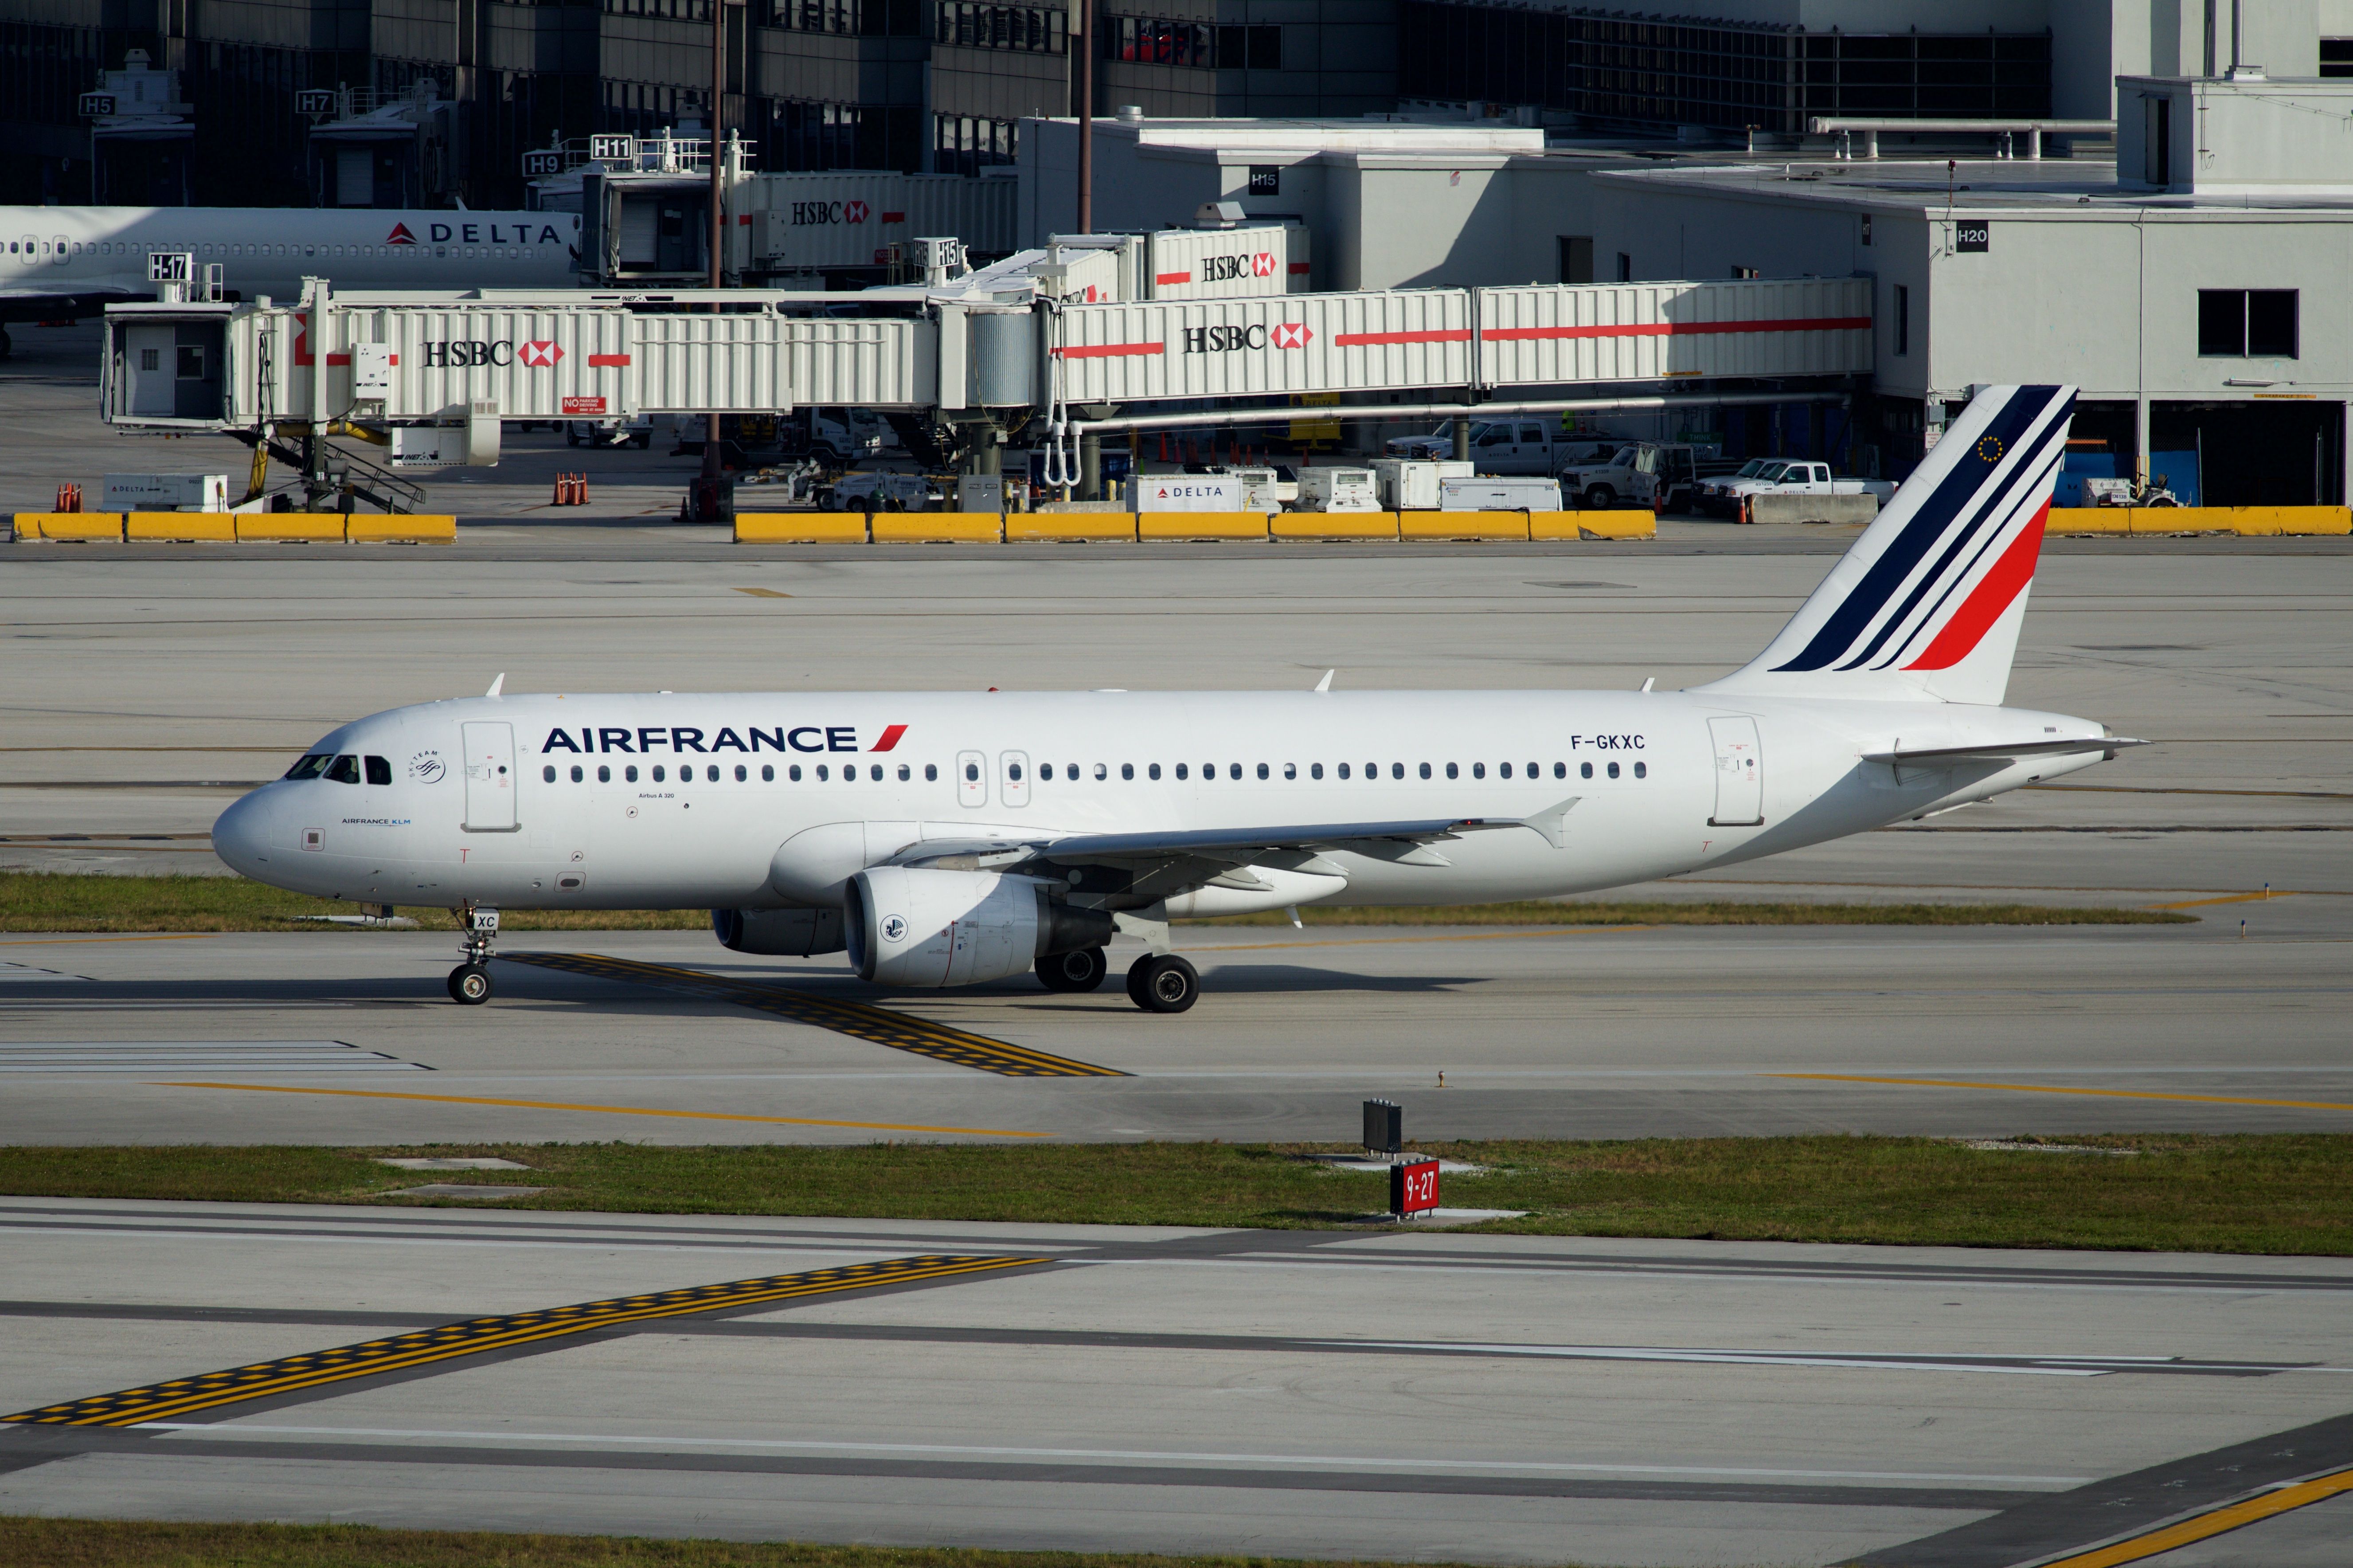 Air France A320 taxiing